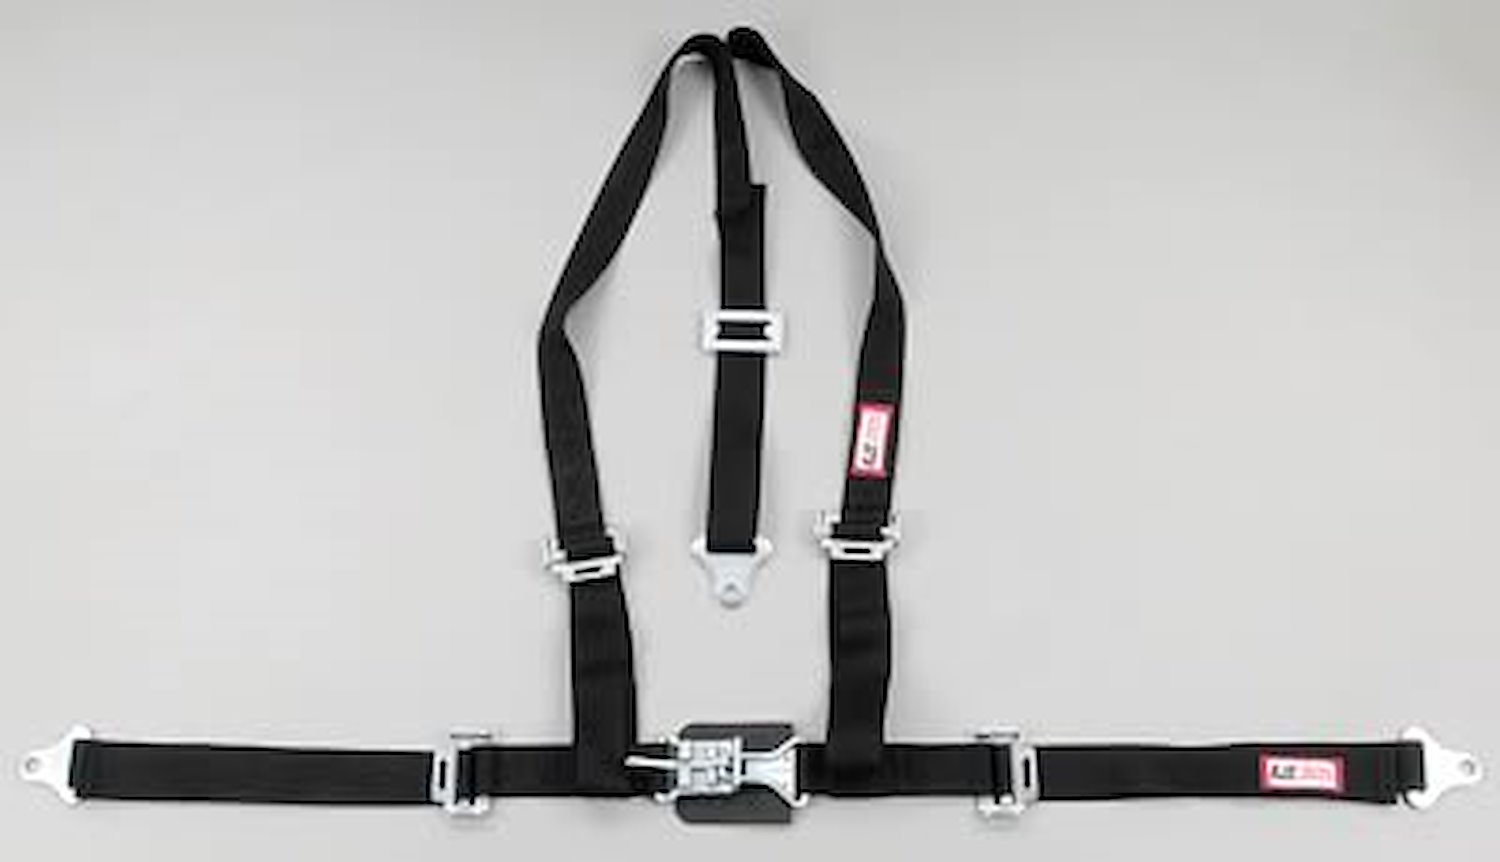 NON-SFI L&L HARNESS 2 PULL UP Lap Belt SNAP SEWN IN 2 S.H. Y FLOOR Mount WRAP/SNAP PURPLE